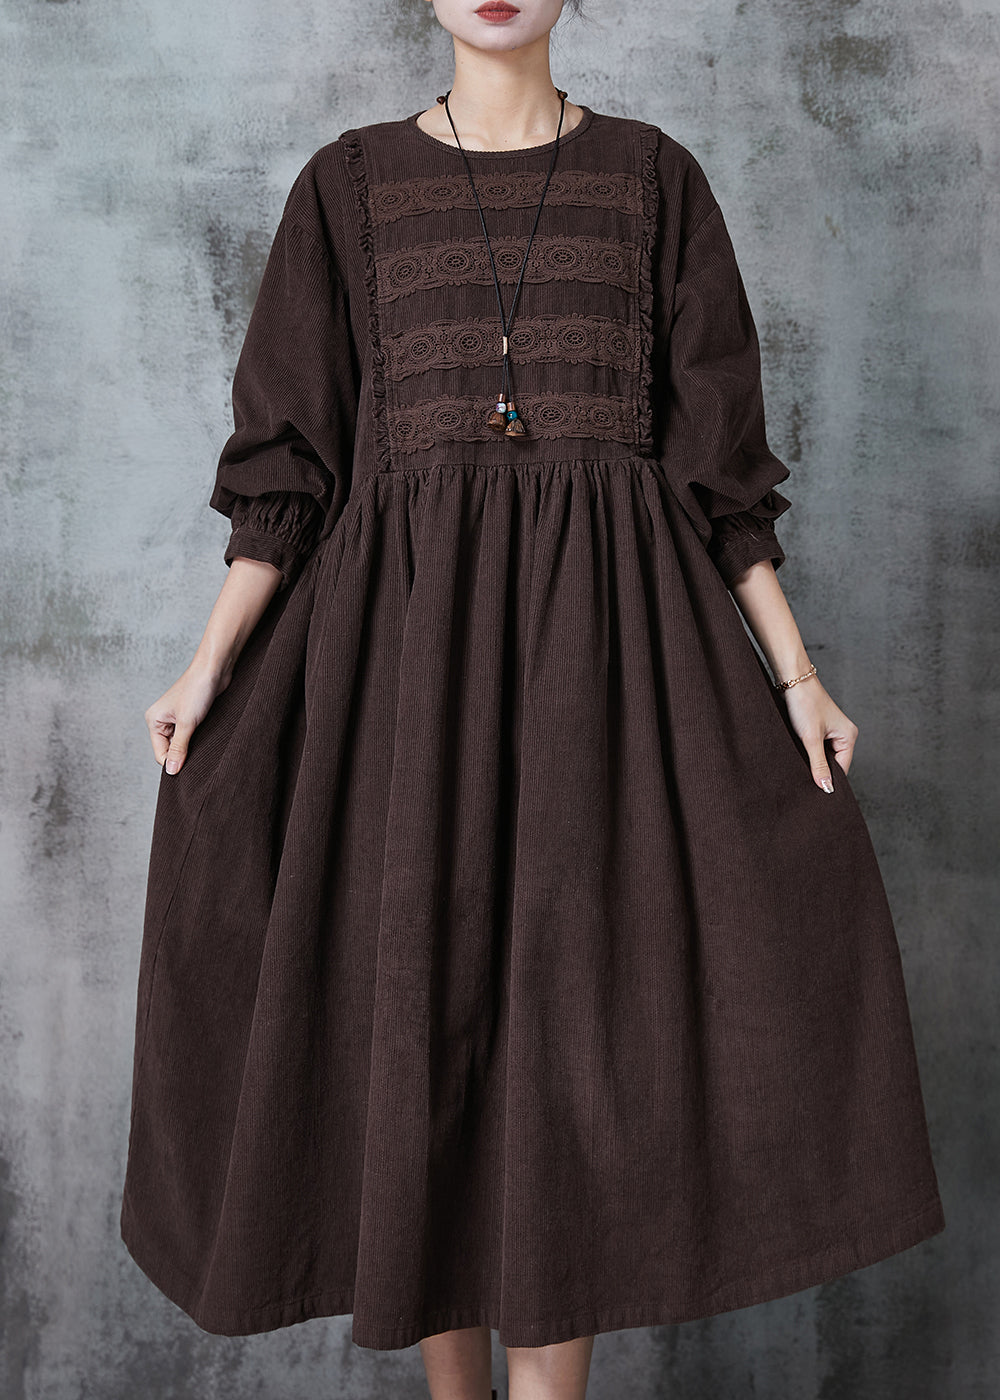 Chocolate Lace Patchwork Corduroy Dress Oversized Spring